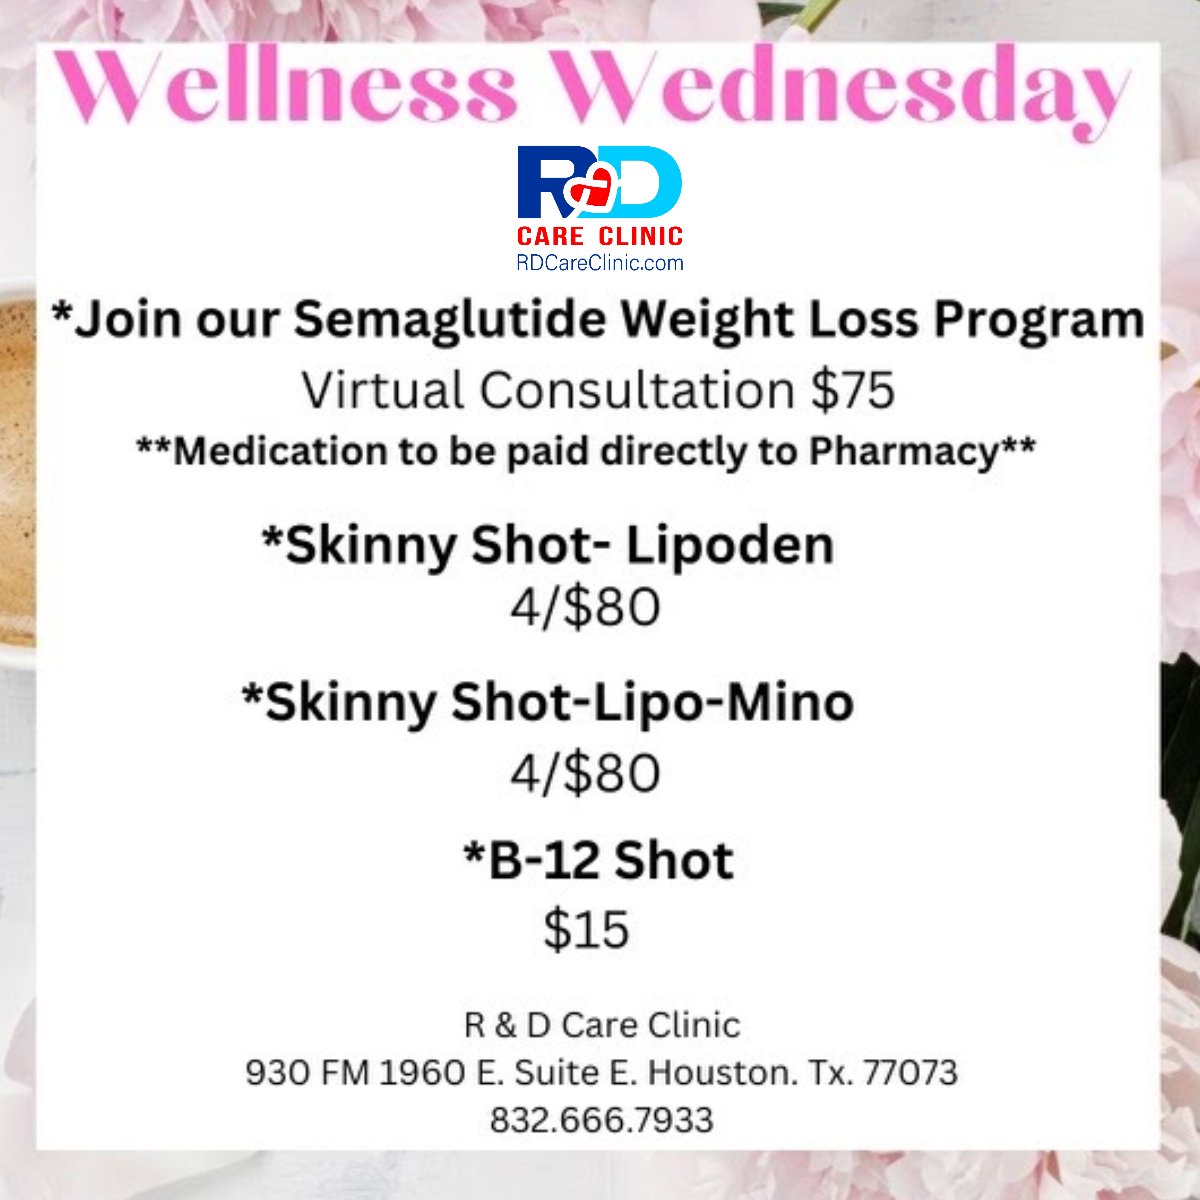 Today is The Day...  Wellness Wednesday!

Great Deals on Lipo-Mino Mix & Semaglutide Weight Loss Program

Your Wellness Center Houston: tinyurl.com/27dl6dou

#health #medical #healthcare #medicine #treatment #wellness #weightloss #semaglutide #lipomino #lipo